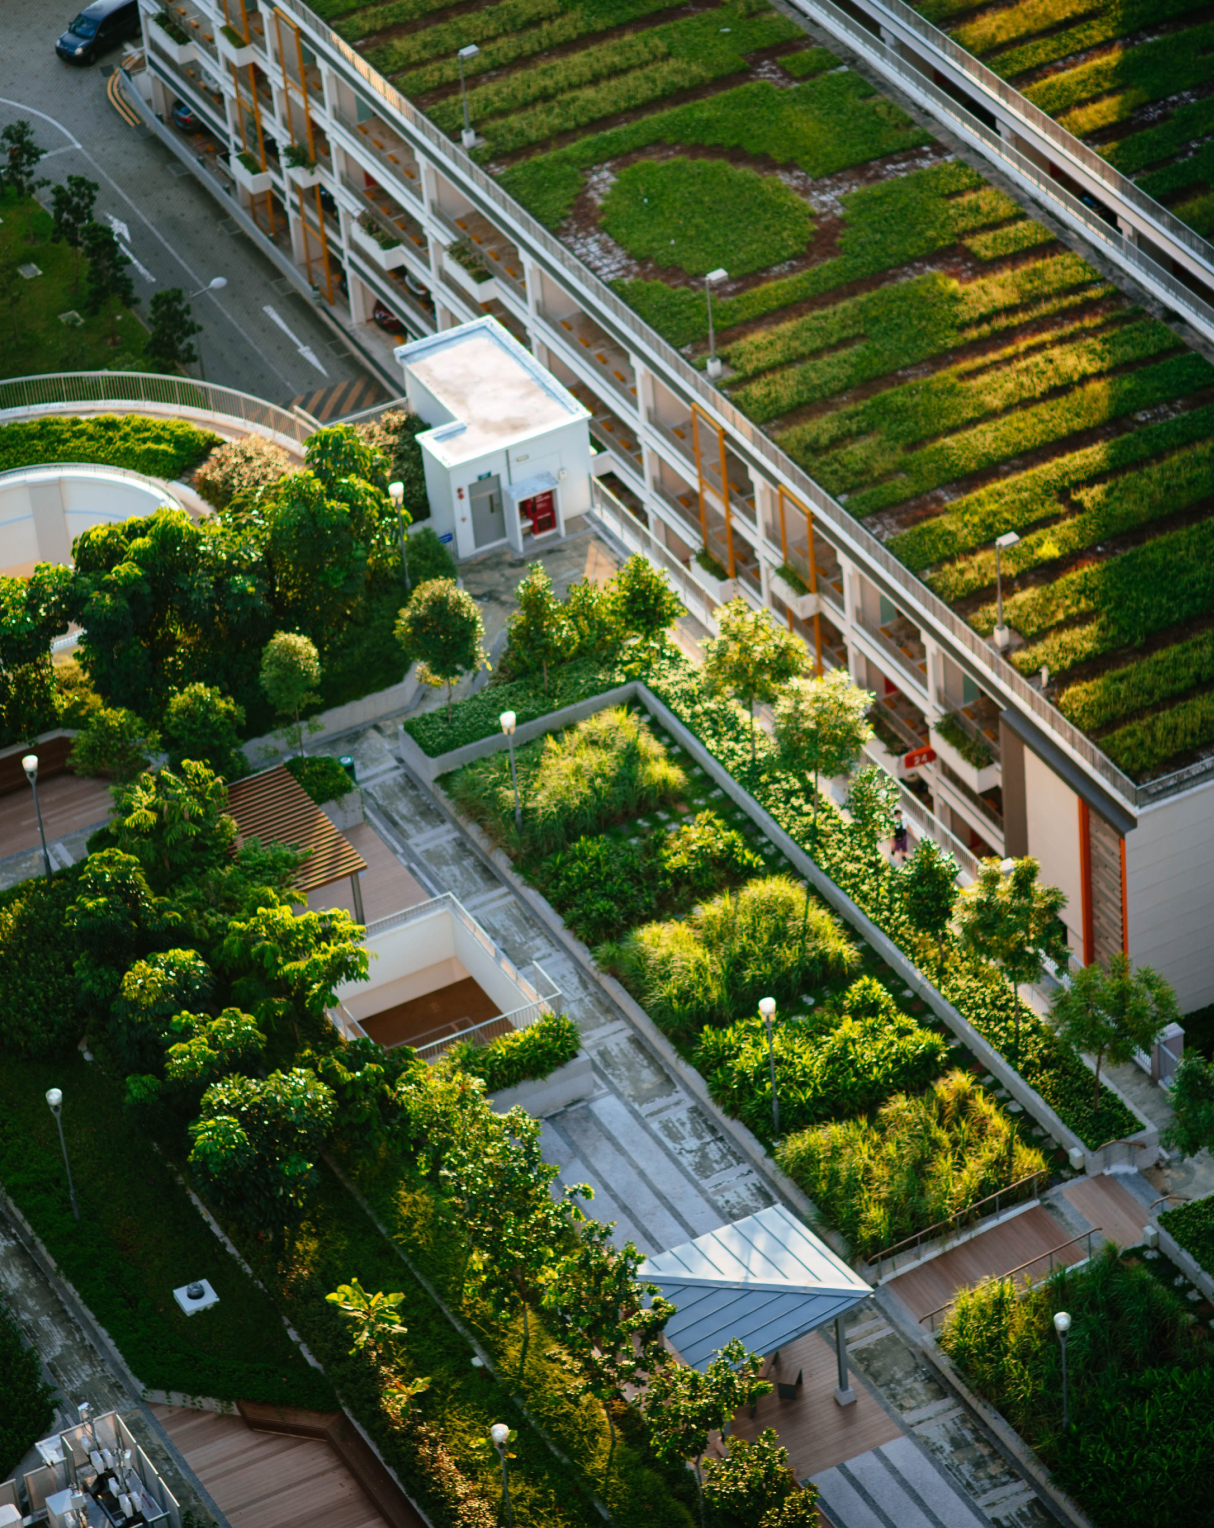 Top view of building with trees